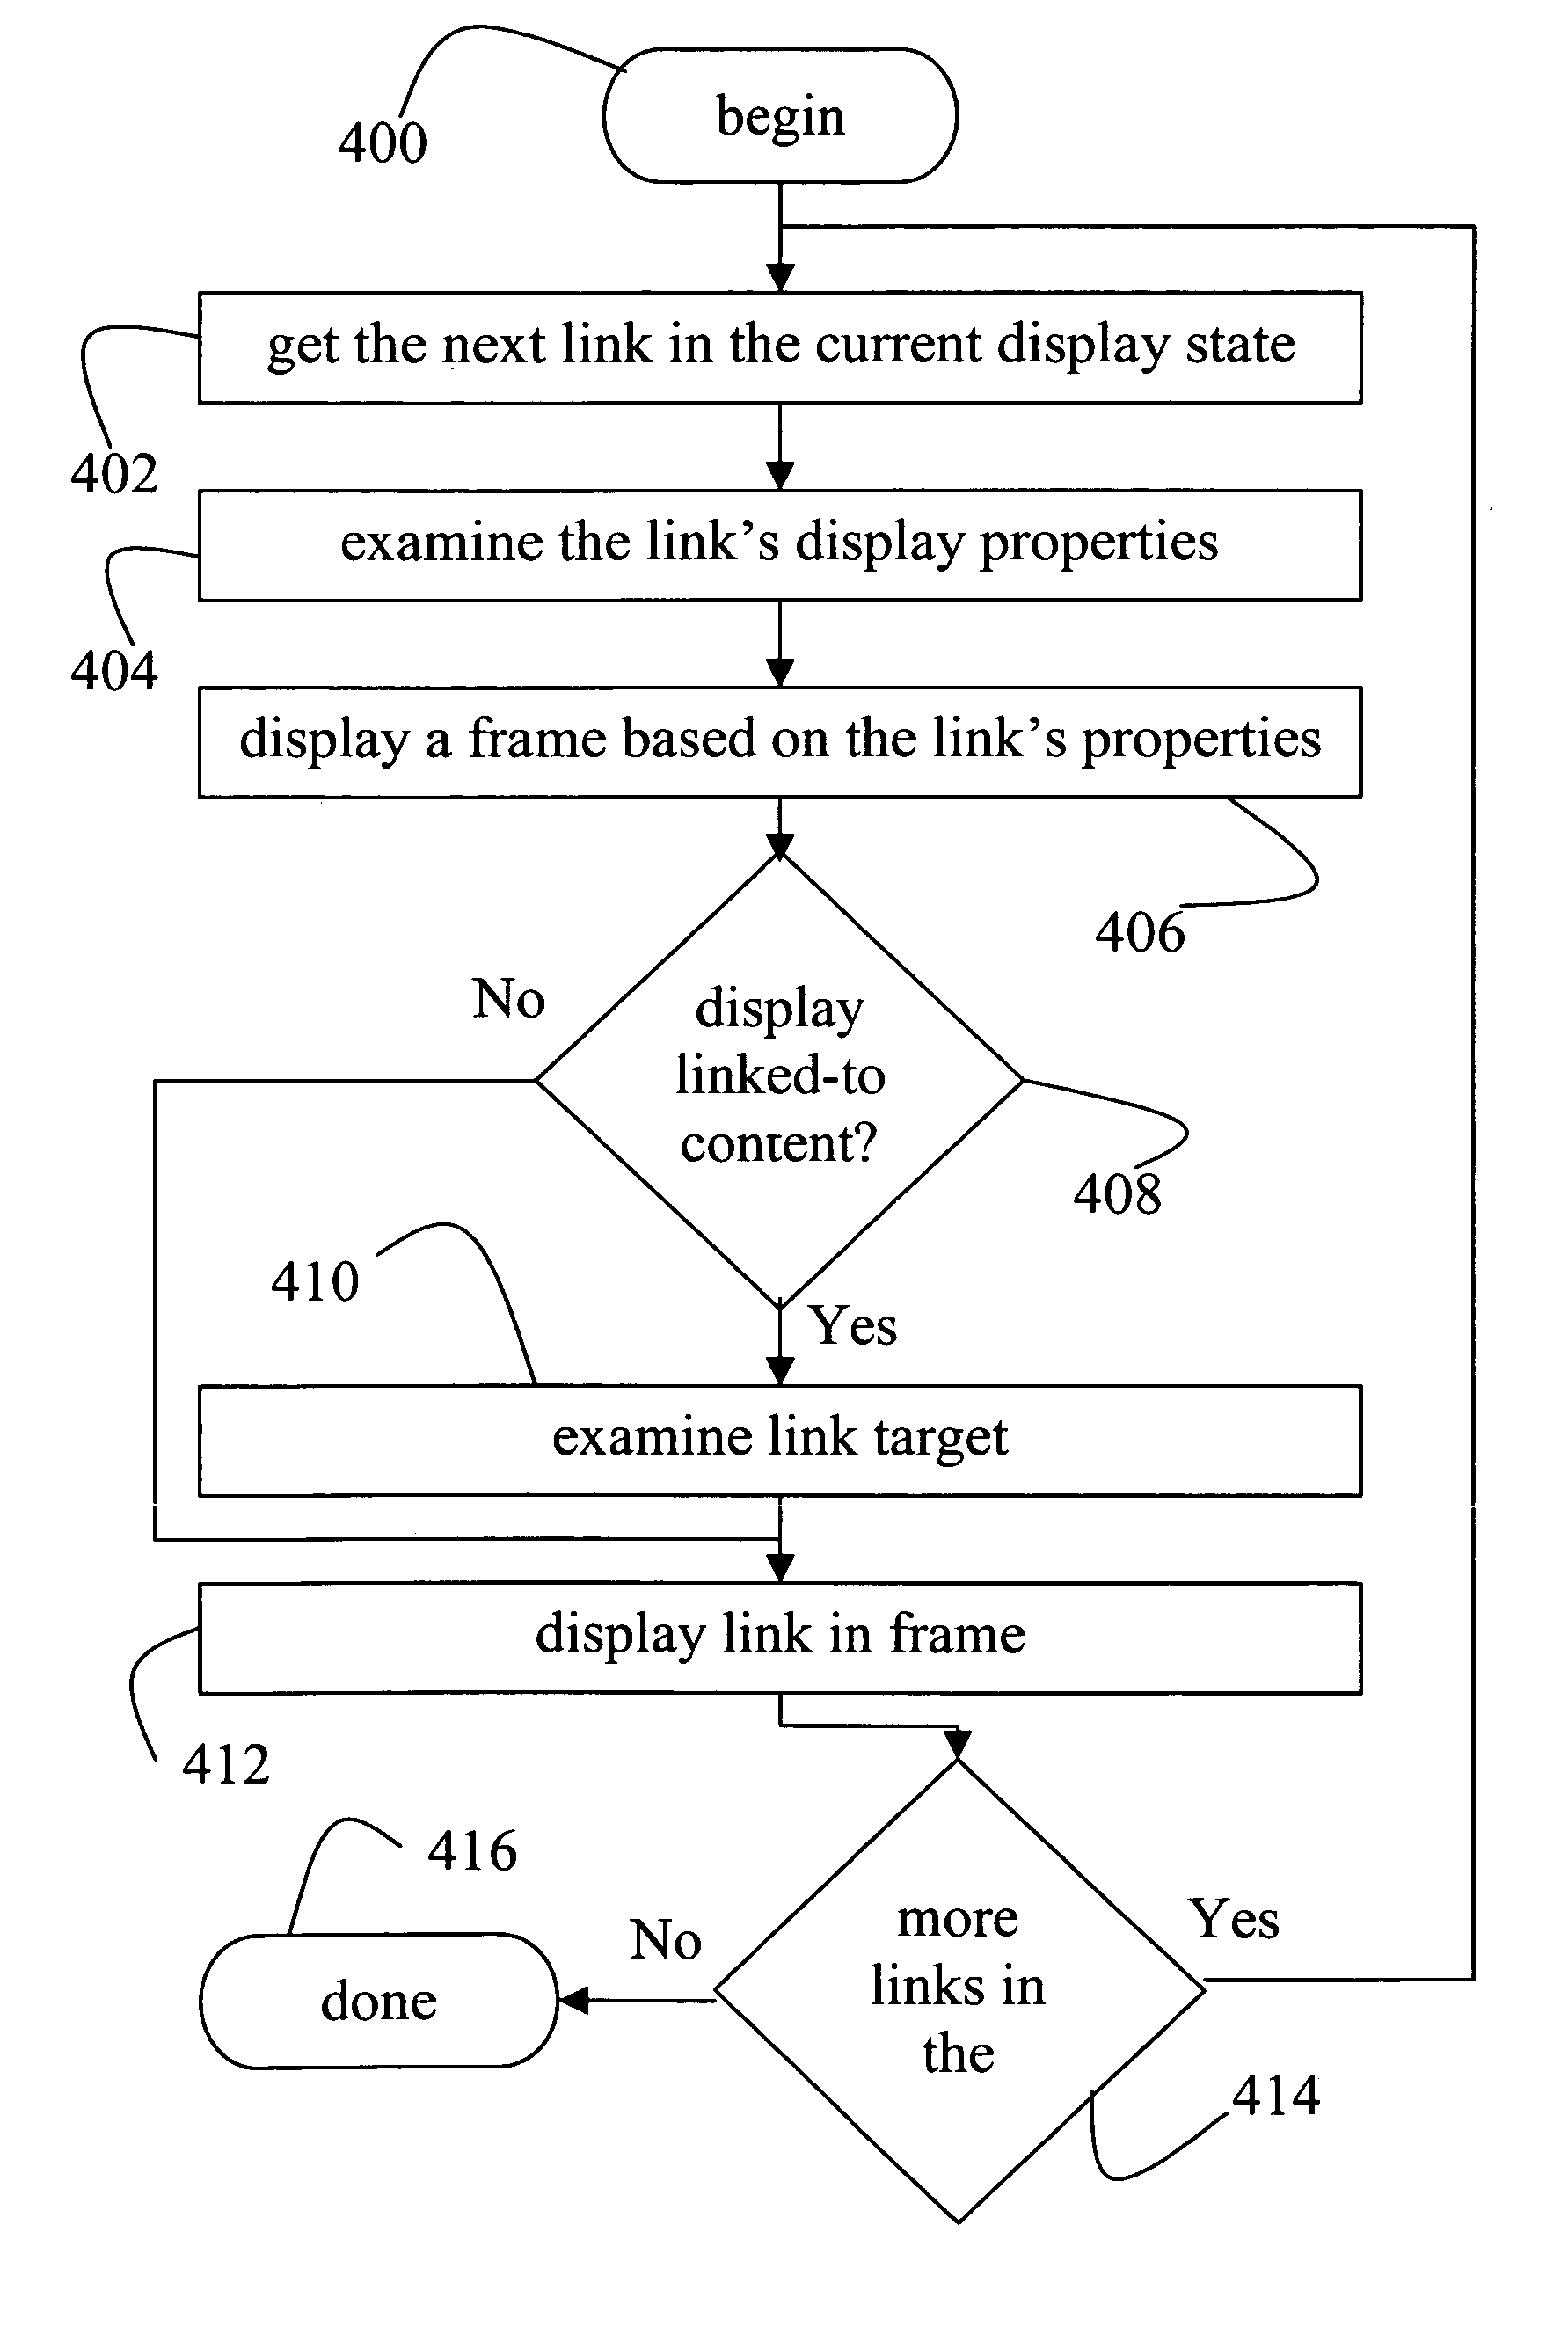 Computer user interface architecture wherein users interact with both content and user interface by activating links